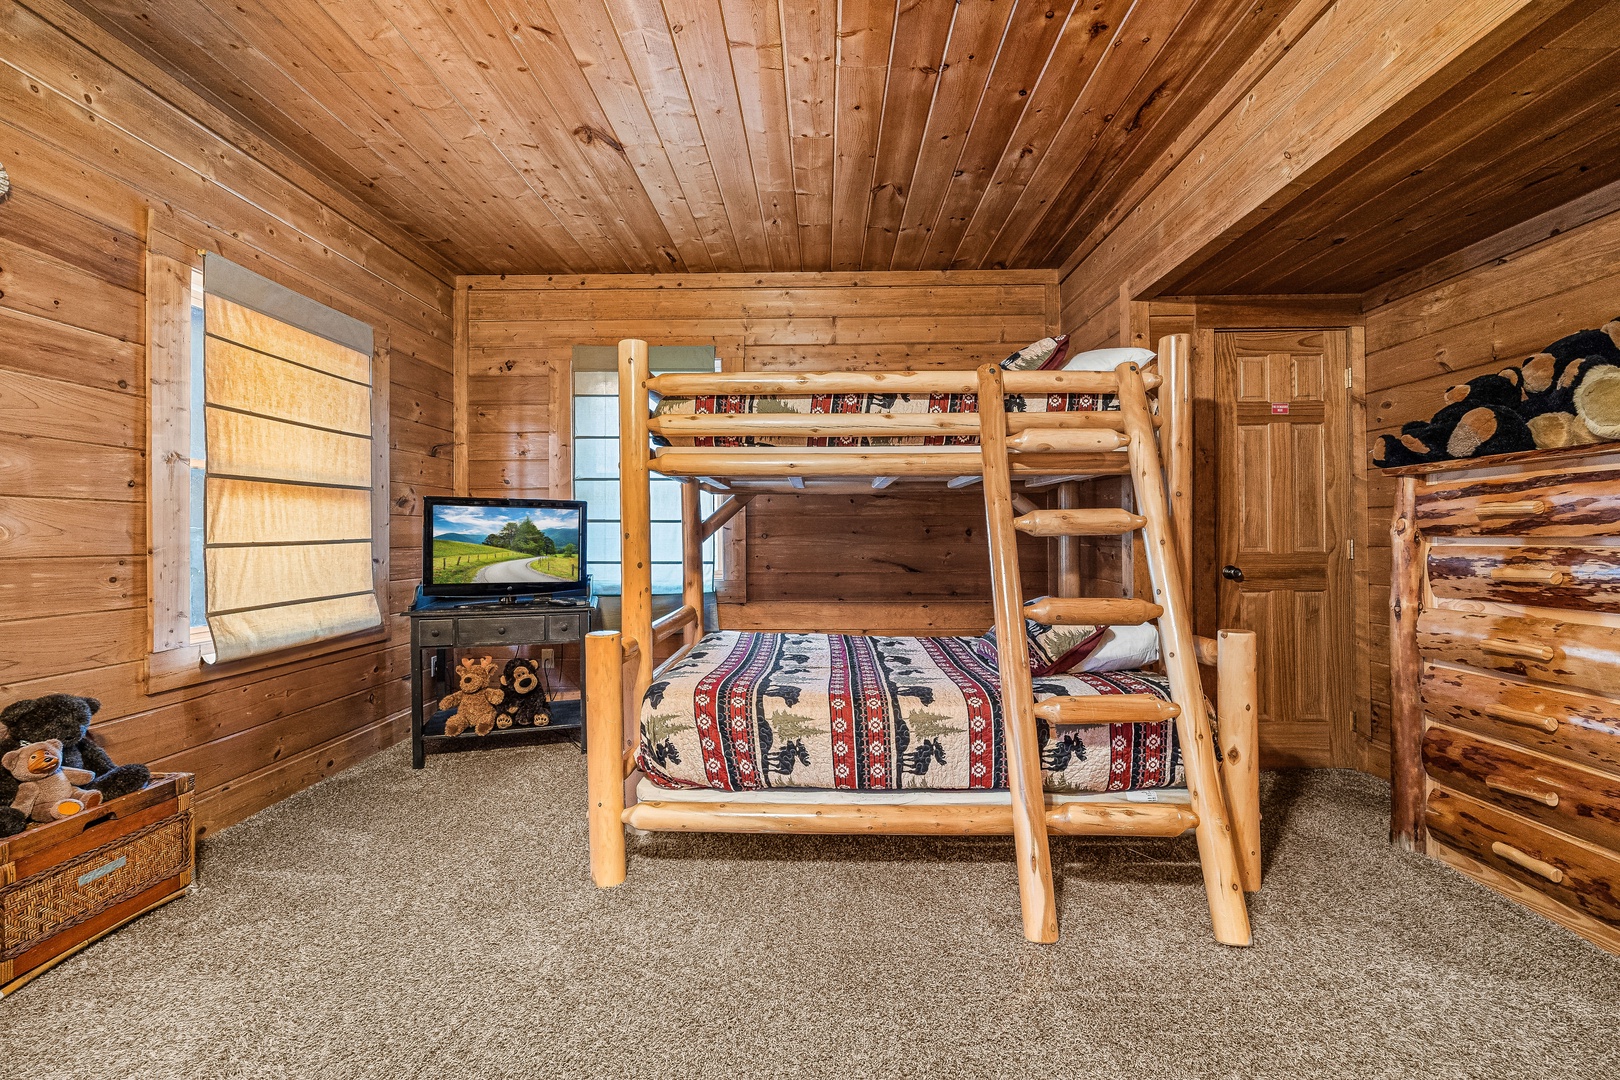 Bedroom with wooden Bunkbeds at A Beary Nice Cabin, a 2 bedroom cabin rental located in Pigeon Forge